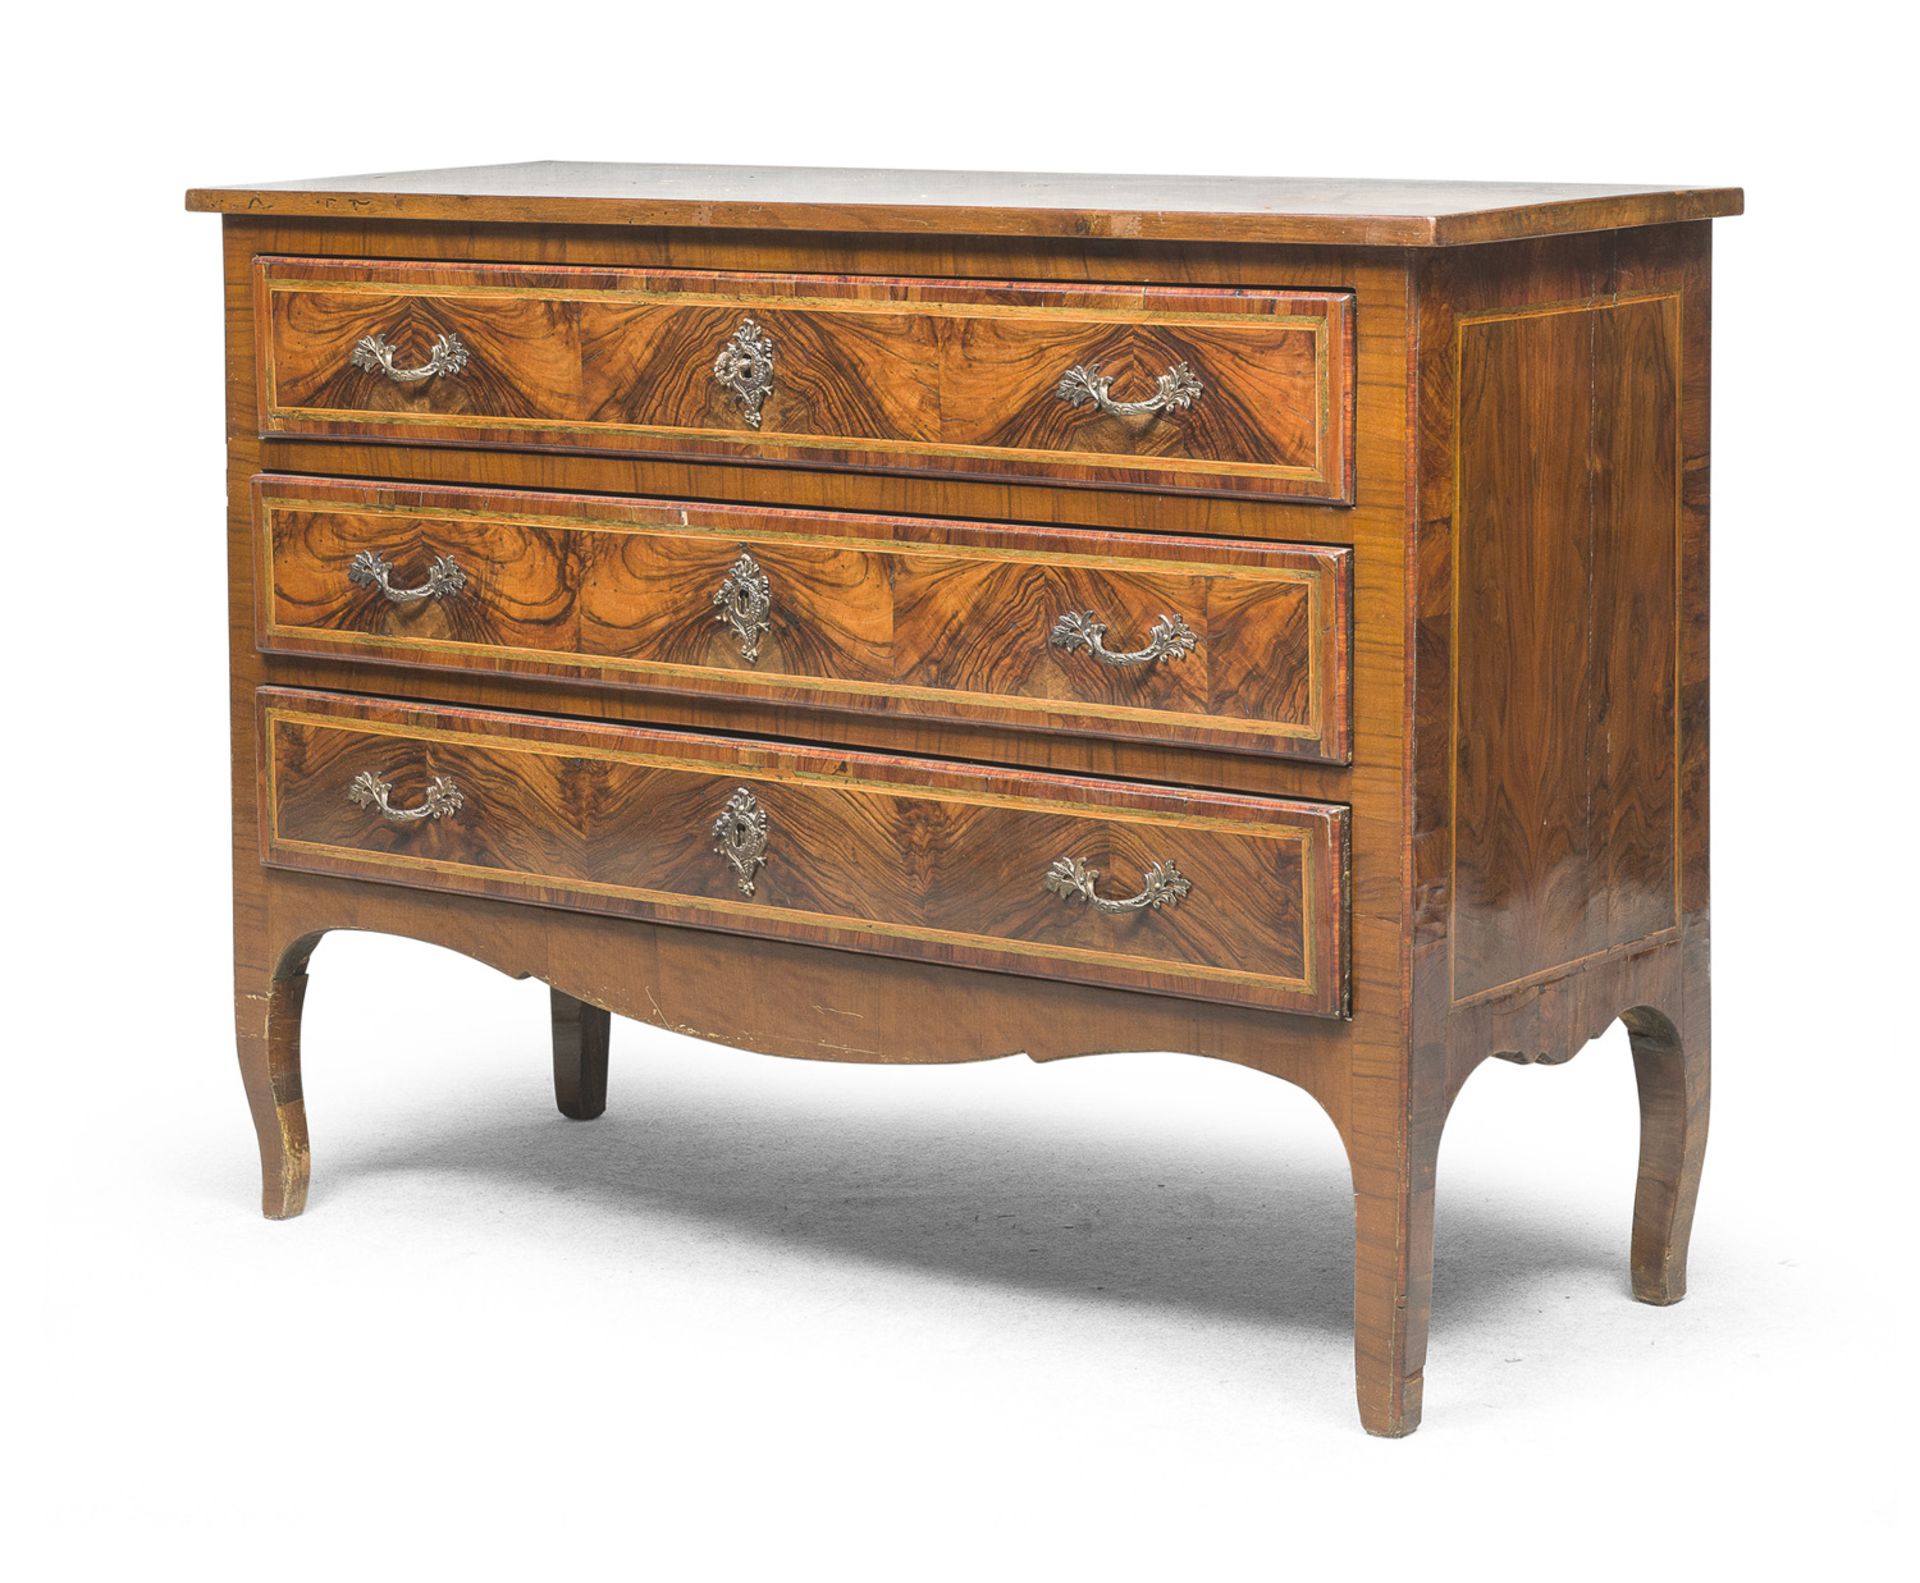 COMMODE IN WALNUT AND CAROB CENTRAL ITALY LATE 18TH CENTURY